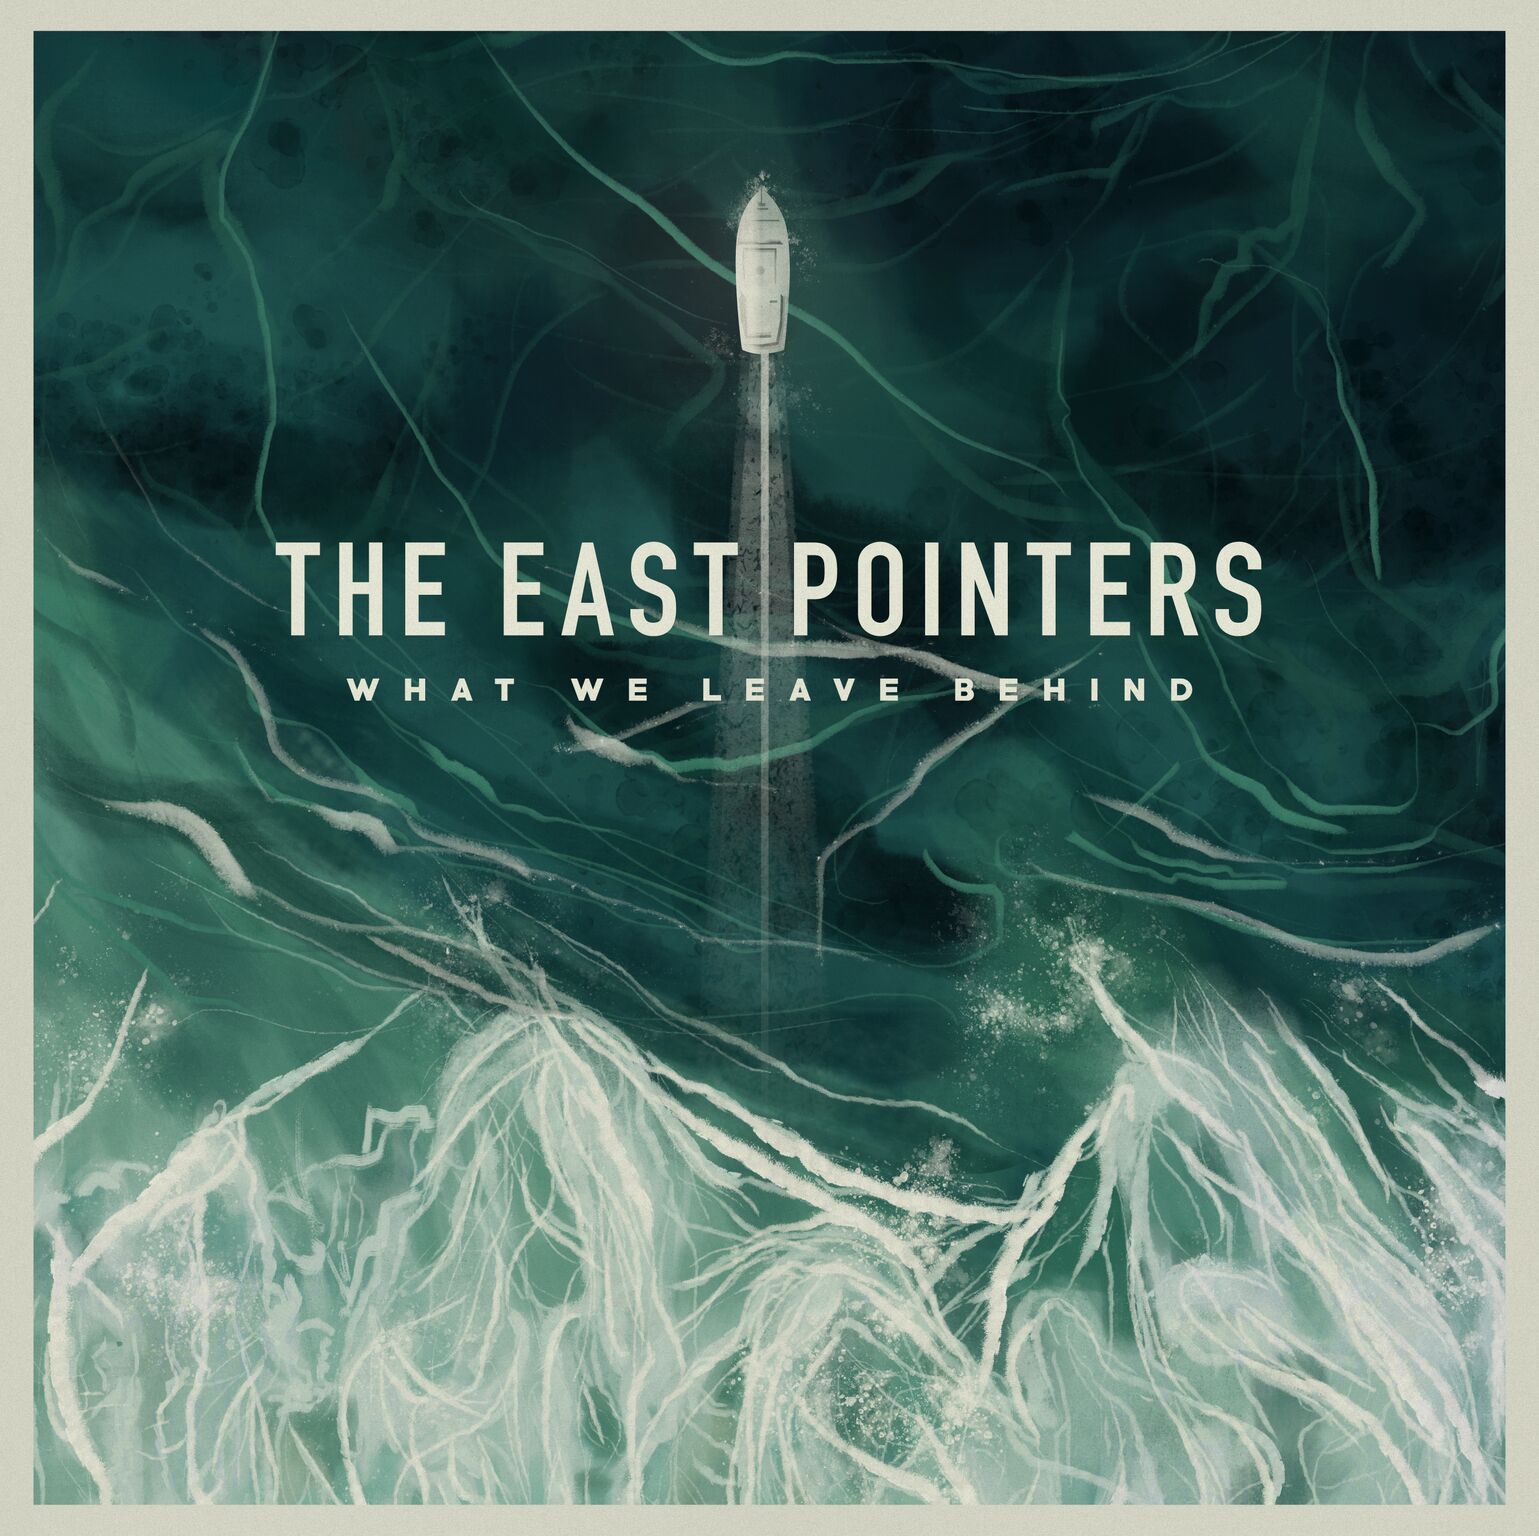 The East Pointers – What We Leave Behind